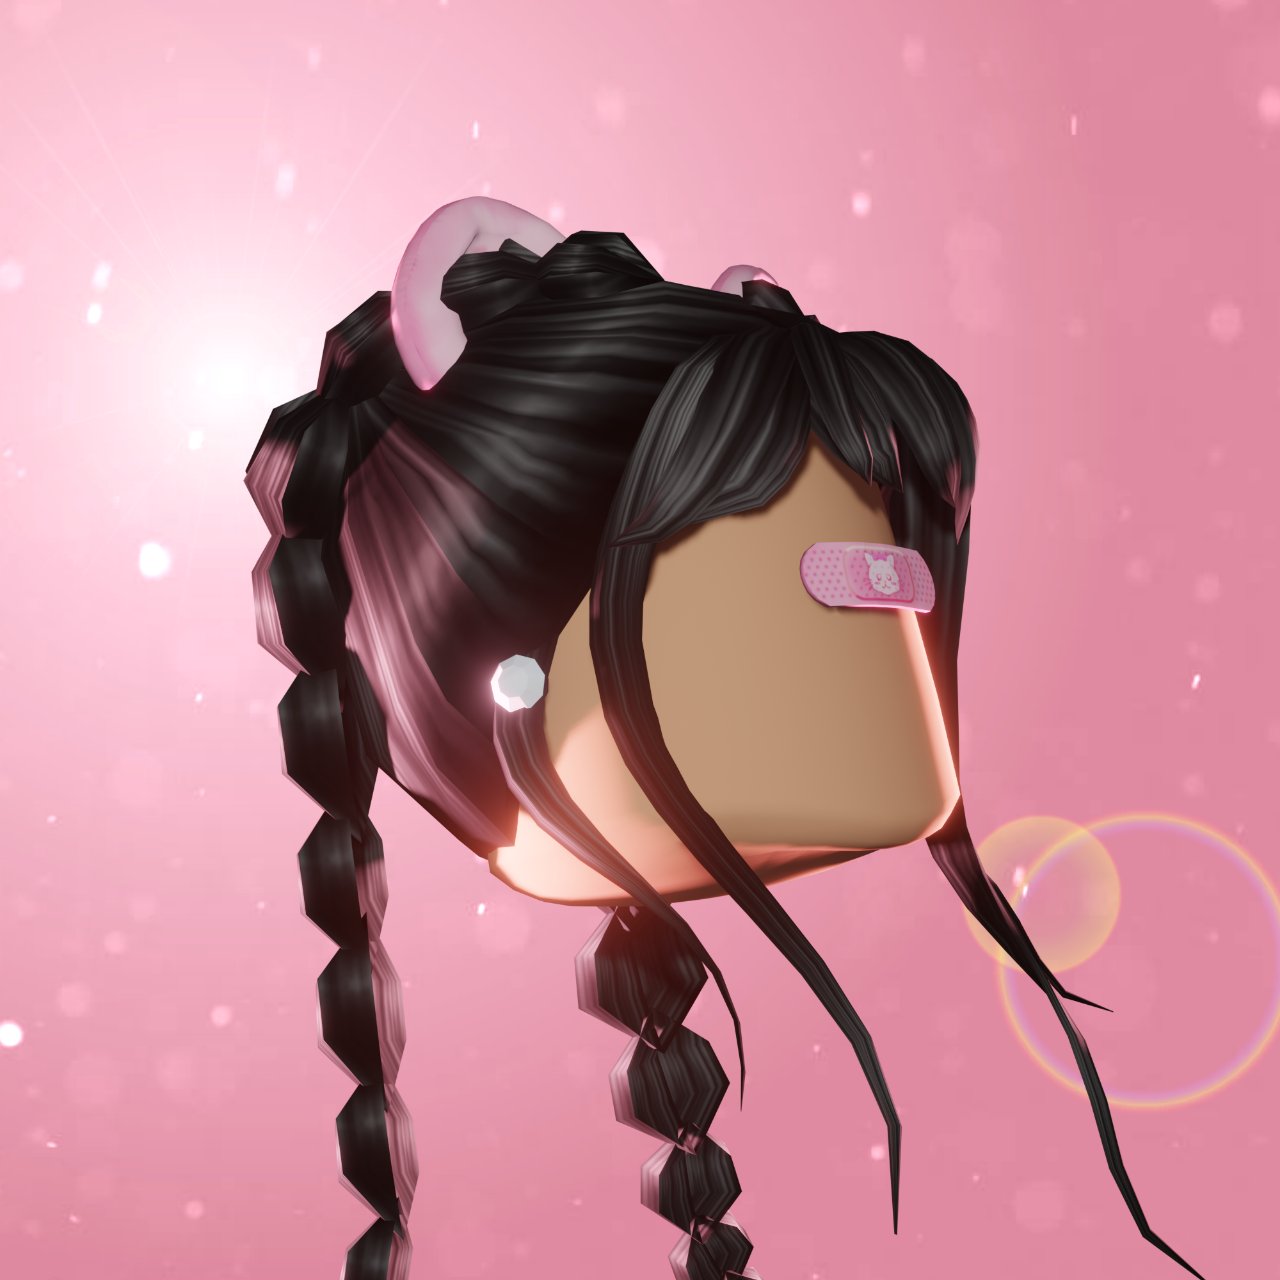 Fsi3n On Twitter A Head Profile Picture Gfx For Jennyb F Roblox Name Note For The Next 10 People Who Buy A Roblox Head Profile Picture Gfx Is 1 1 Pic Gift Dm Me Here Or On My Discord Axilleasgal 8540 Robloxdev Roblox Robloxart Robloxgfx - roblox profile picture gfx